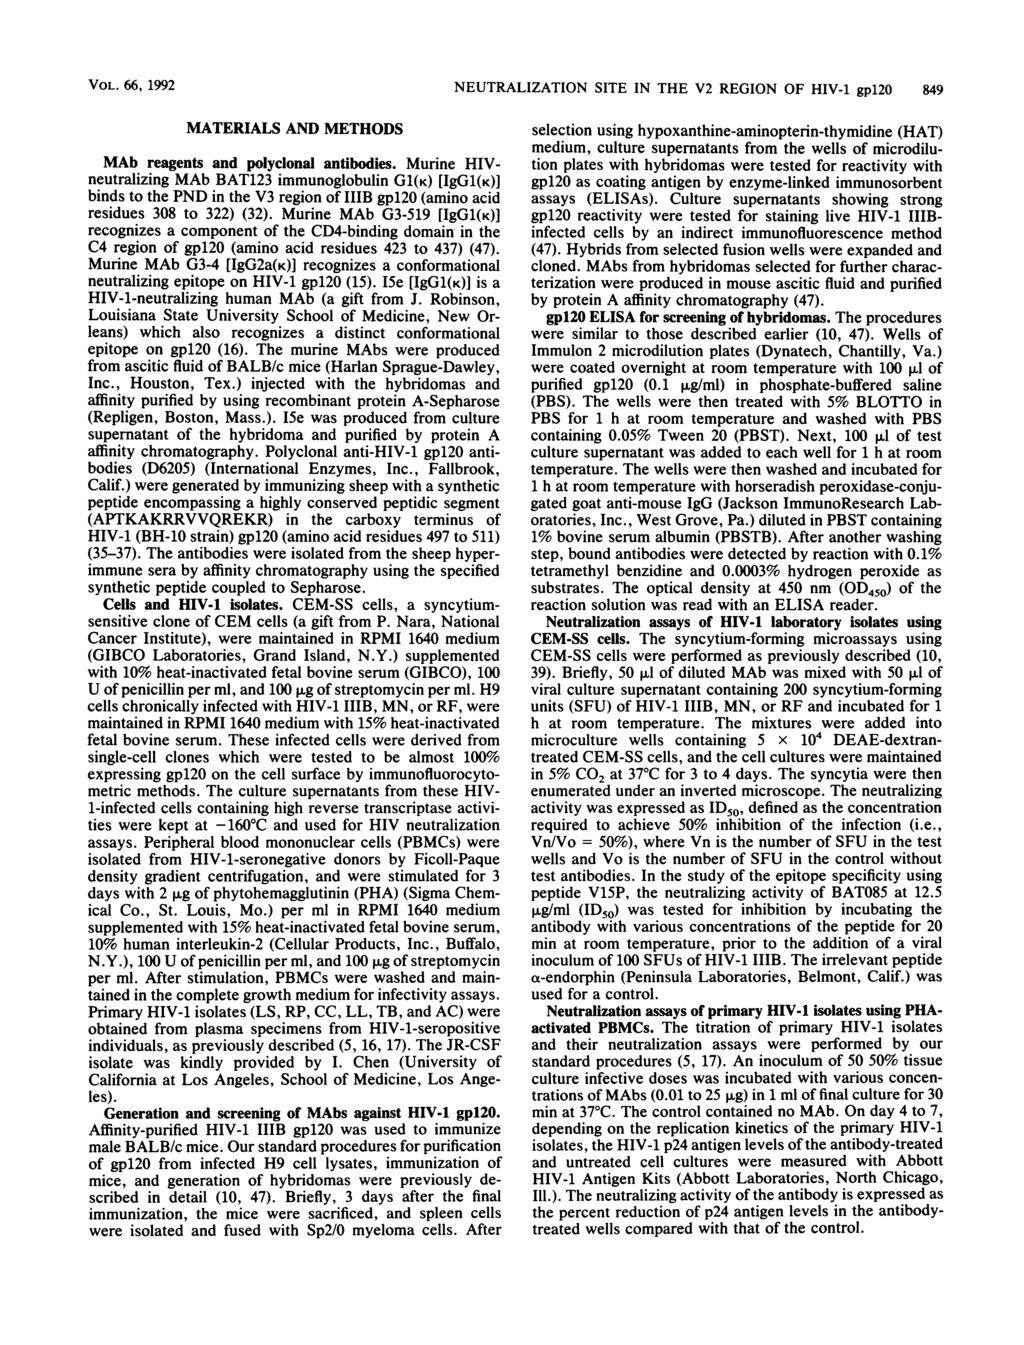 VOL. 66, 1992 NEUTRALIZATION SITE IN THE V2 REGION OF HIV-1 gpl2 849 MATERIALS AND METHODS MAb reagents and polylonal antibodies.